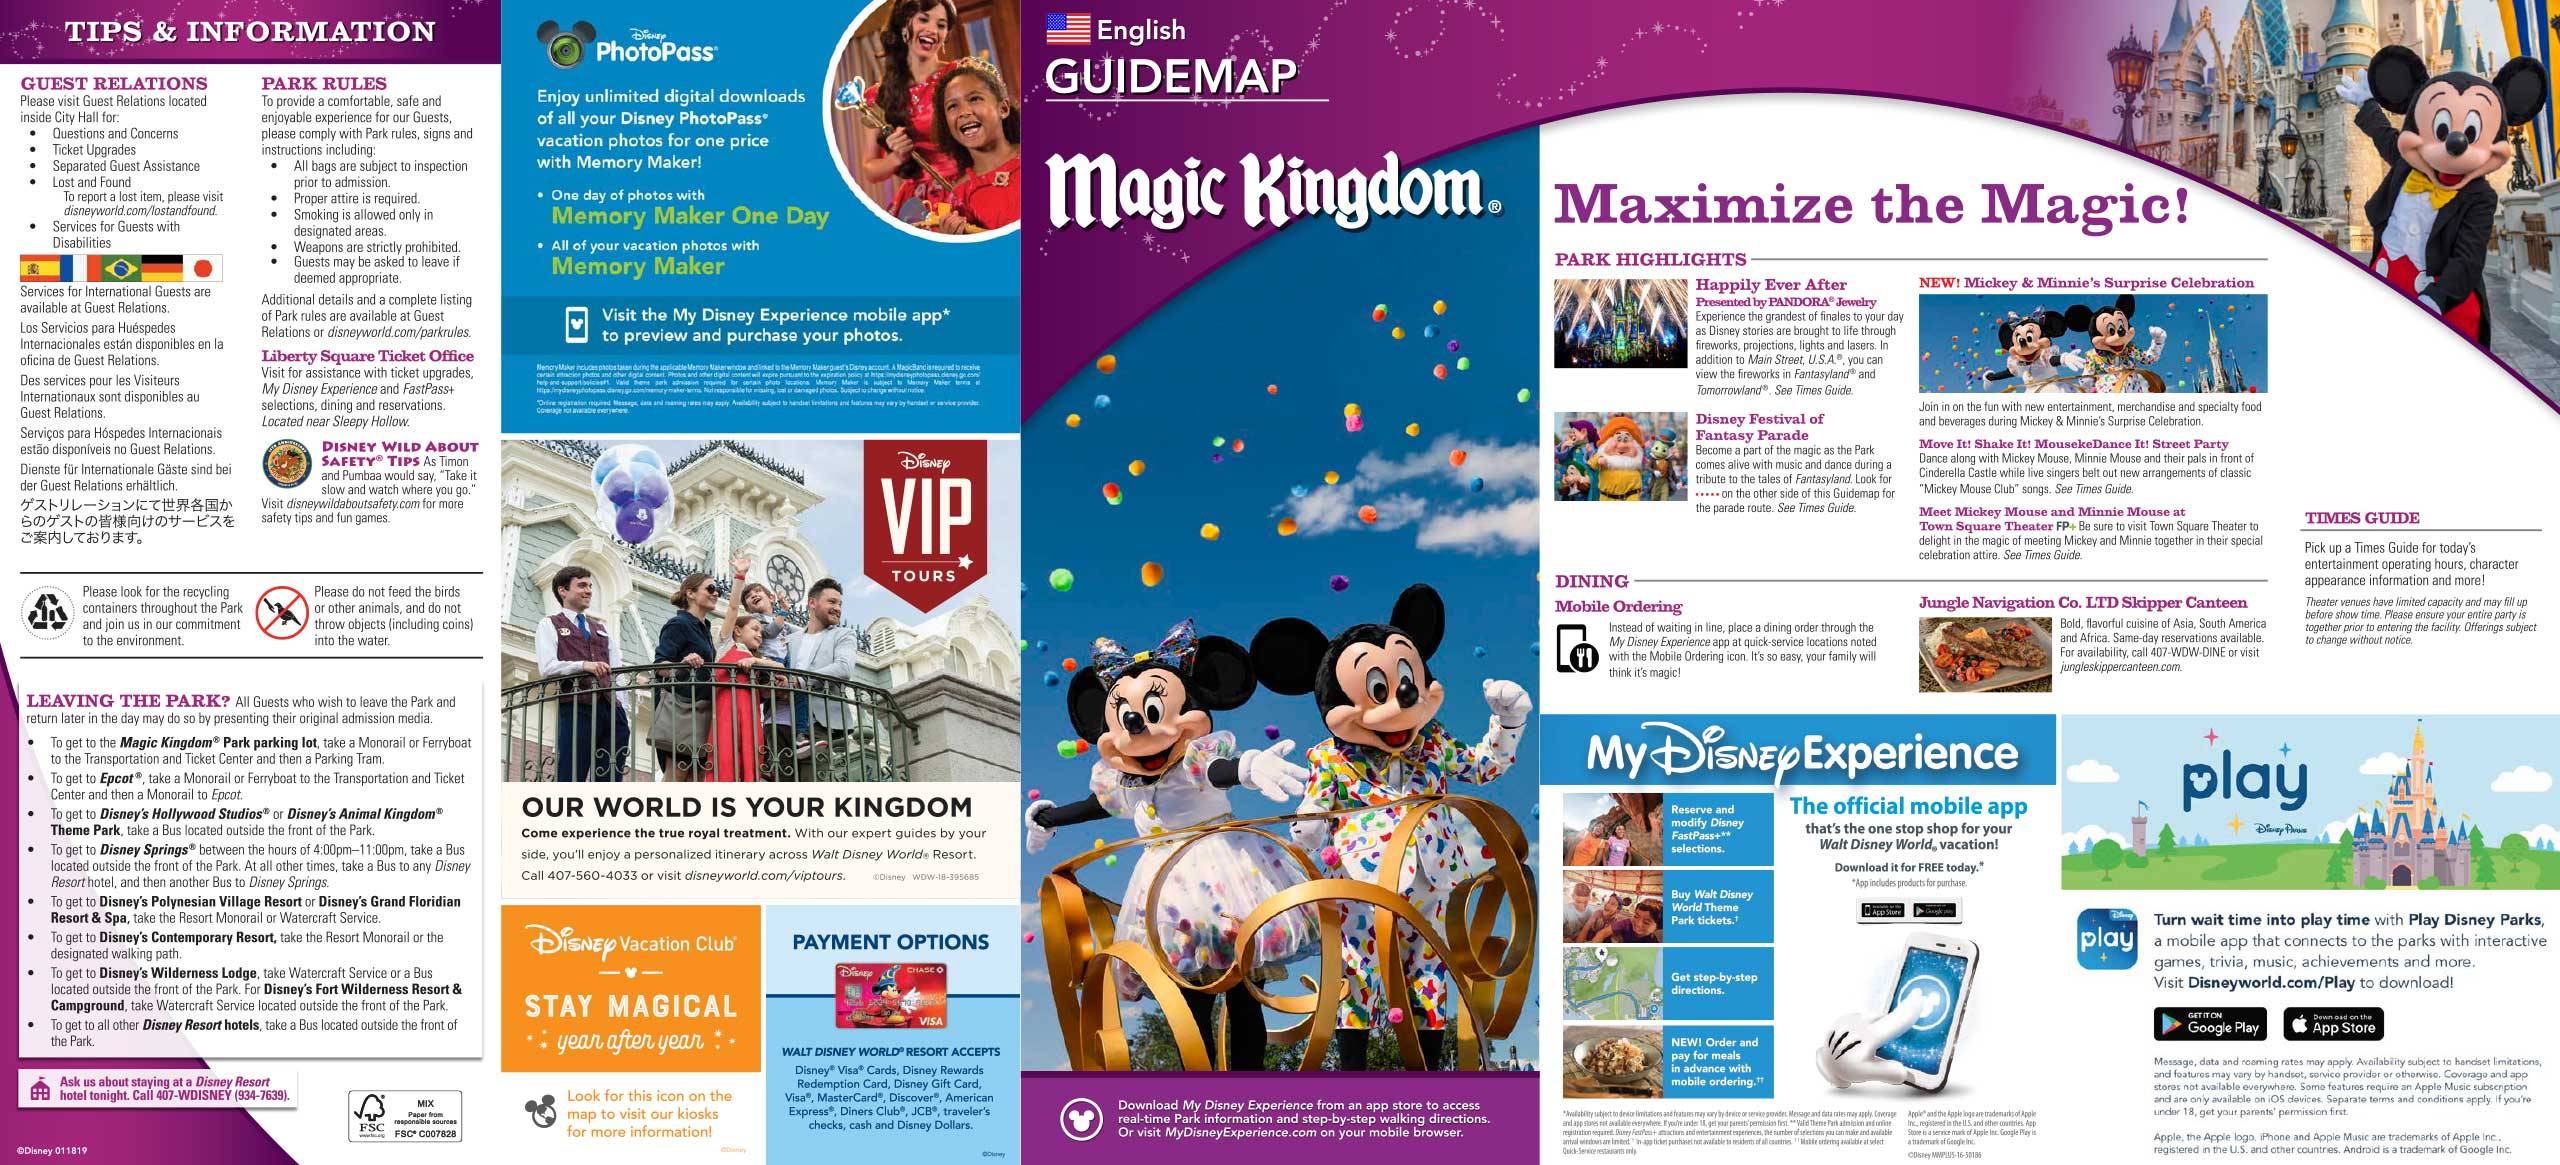 Magic Kingdom Guide Map January 2019 - Front